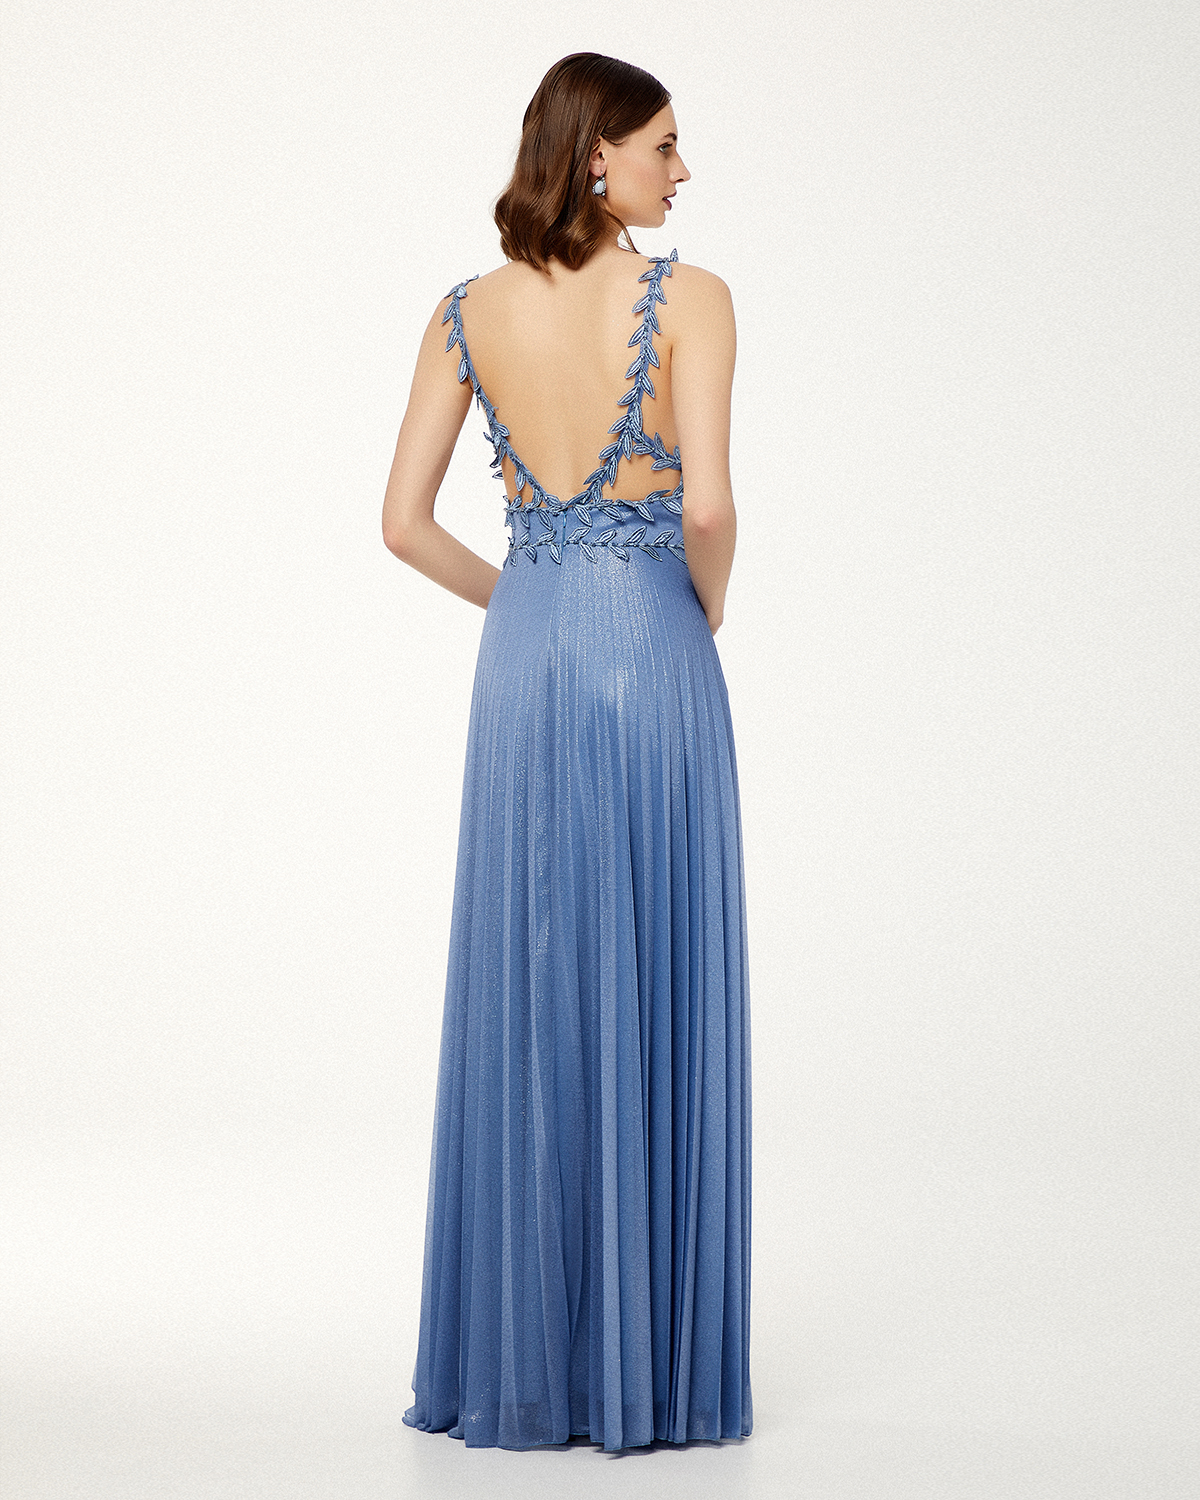 Cocktail Dresses / Long cocktail dress with shining fabric and straps